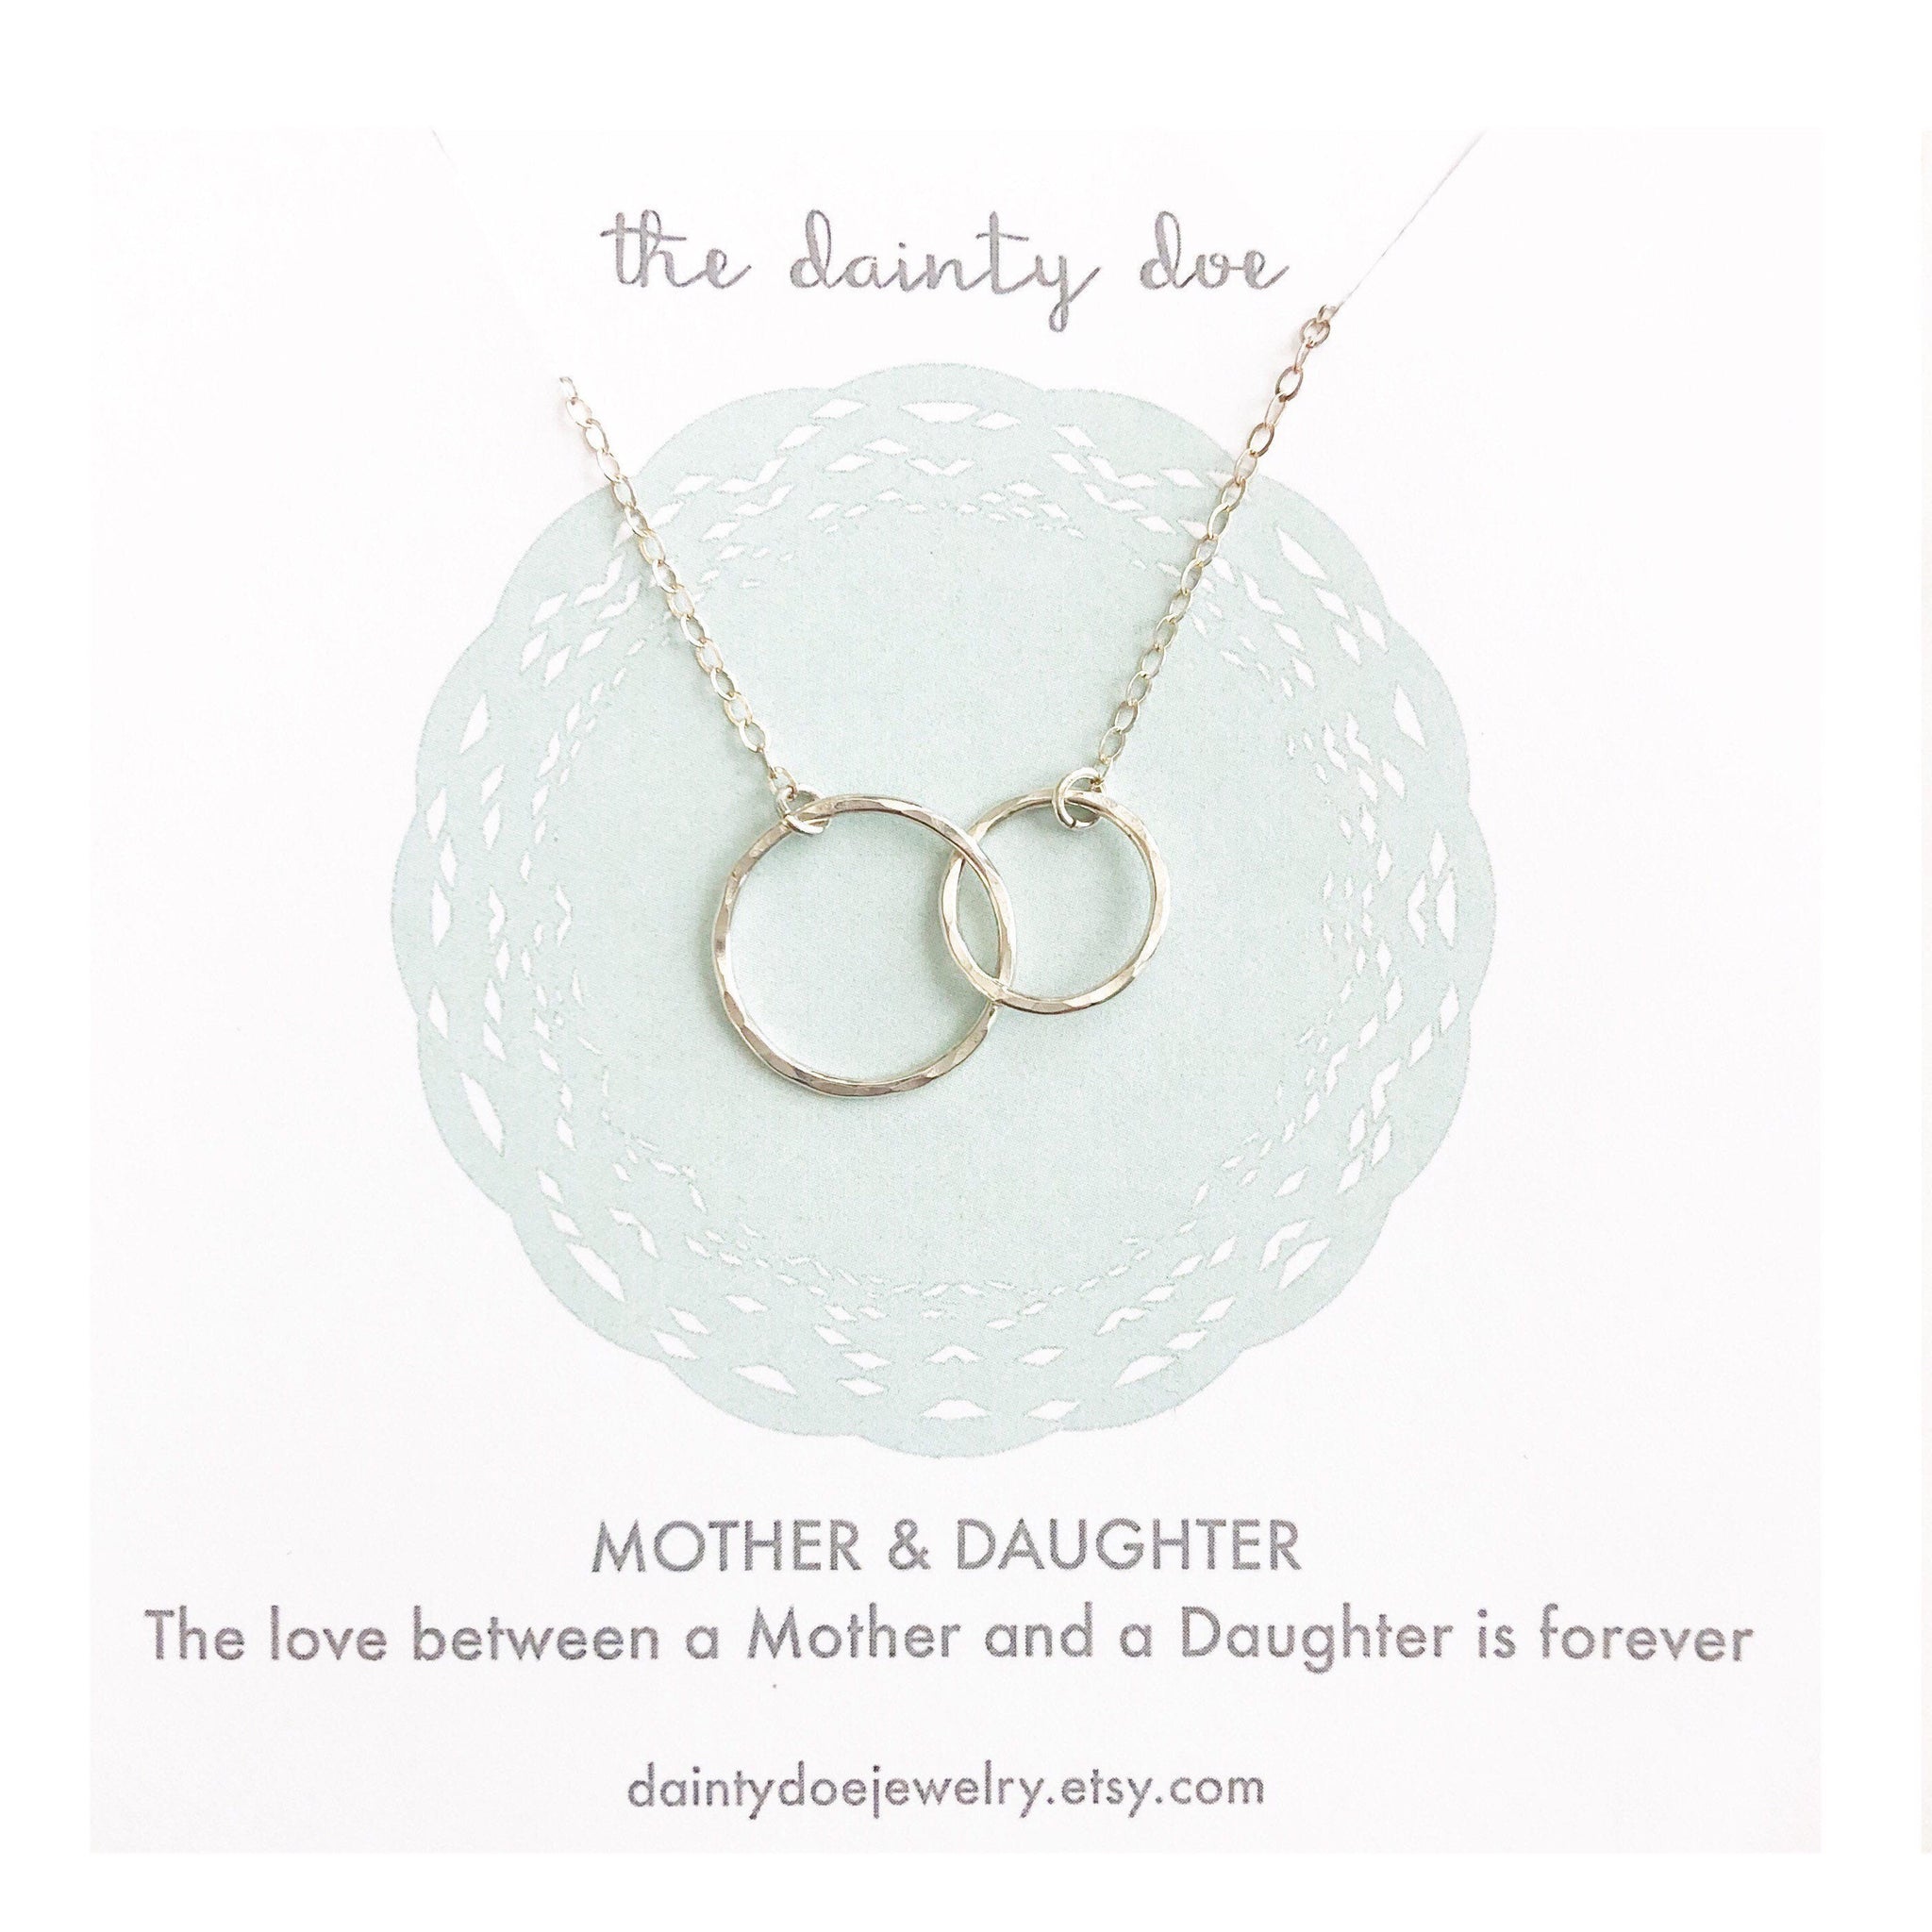 Mother Daughter Necklace, Mom Necklace, Sterling Silver Necklace, Christmas Gift for Mom from Daughter